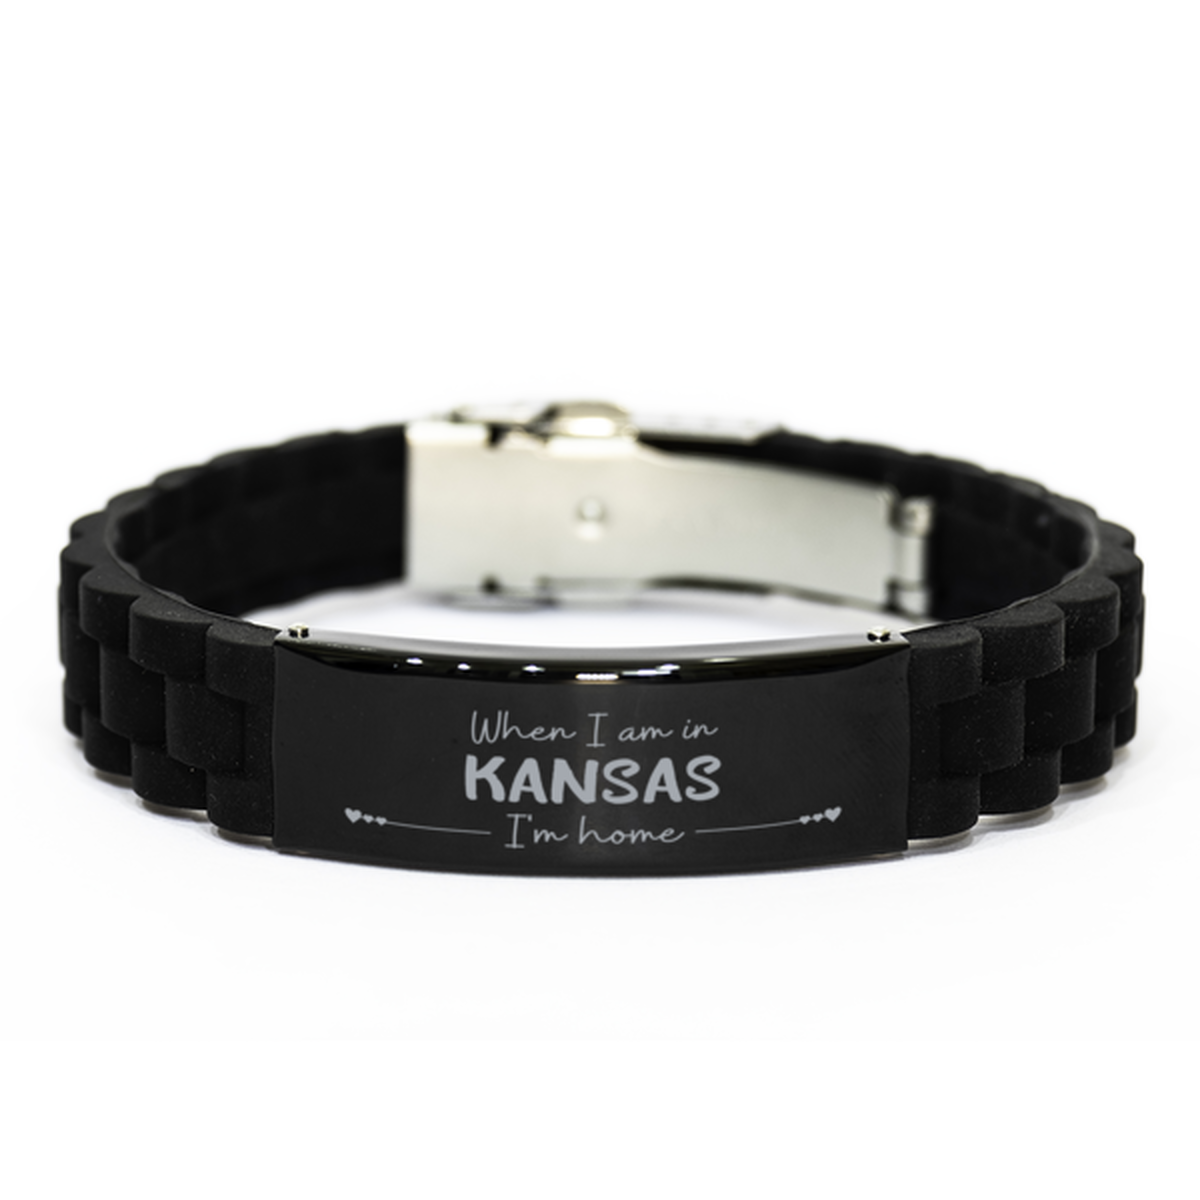 When I am in Kansas I'm home Black Glidelock Clasp Bracelet, Cheap Gifts For Kansas, State Kansas Birthday Gifts for Friends Coworker